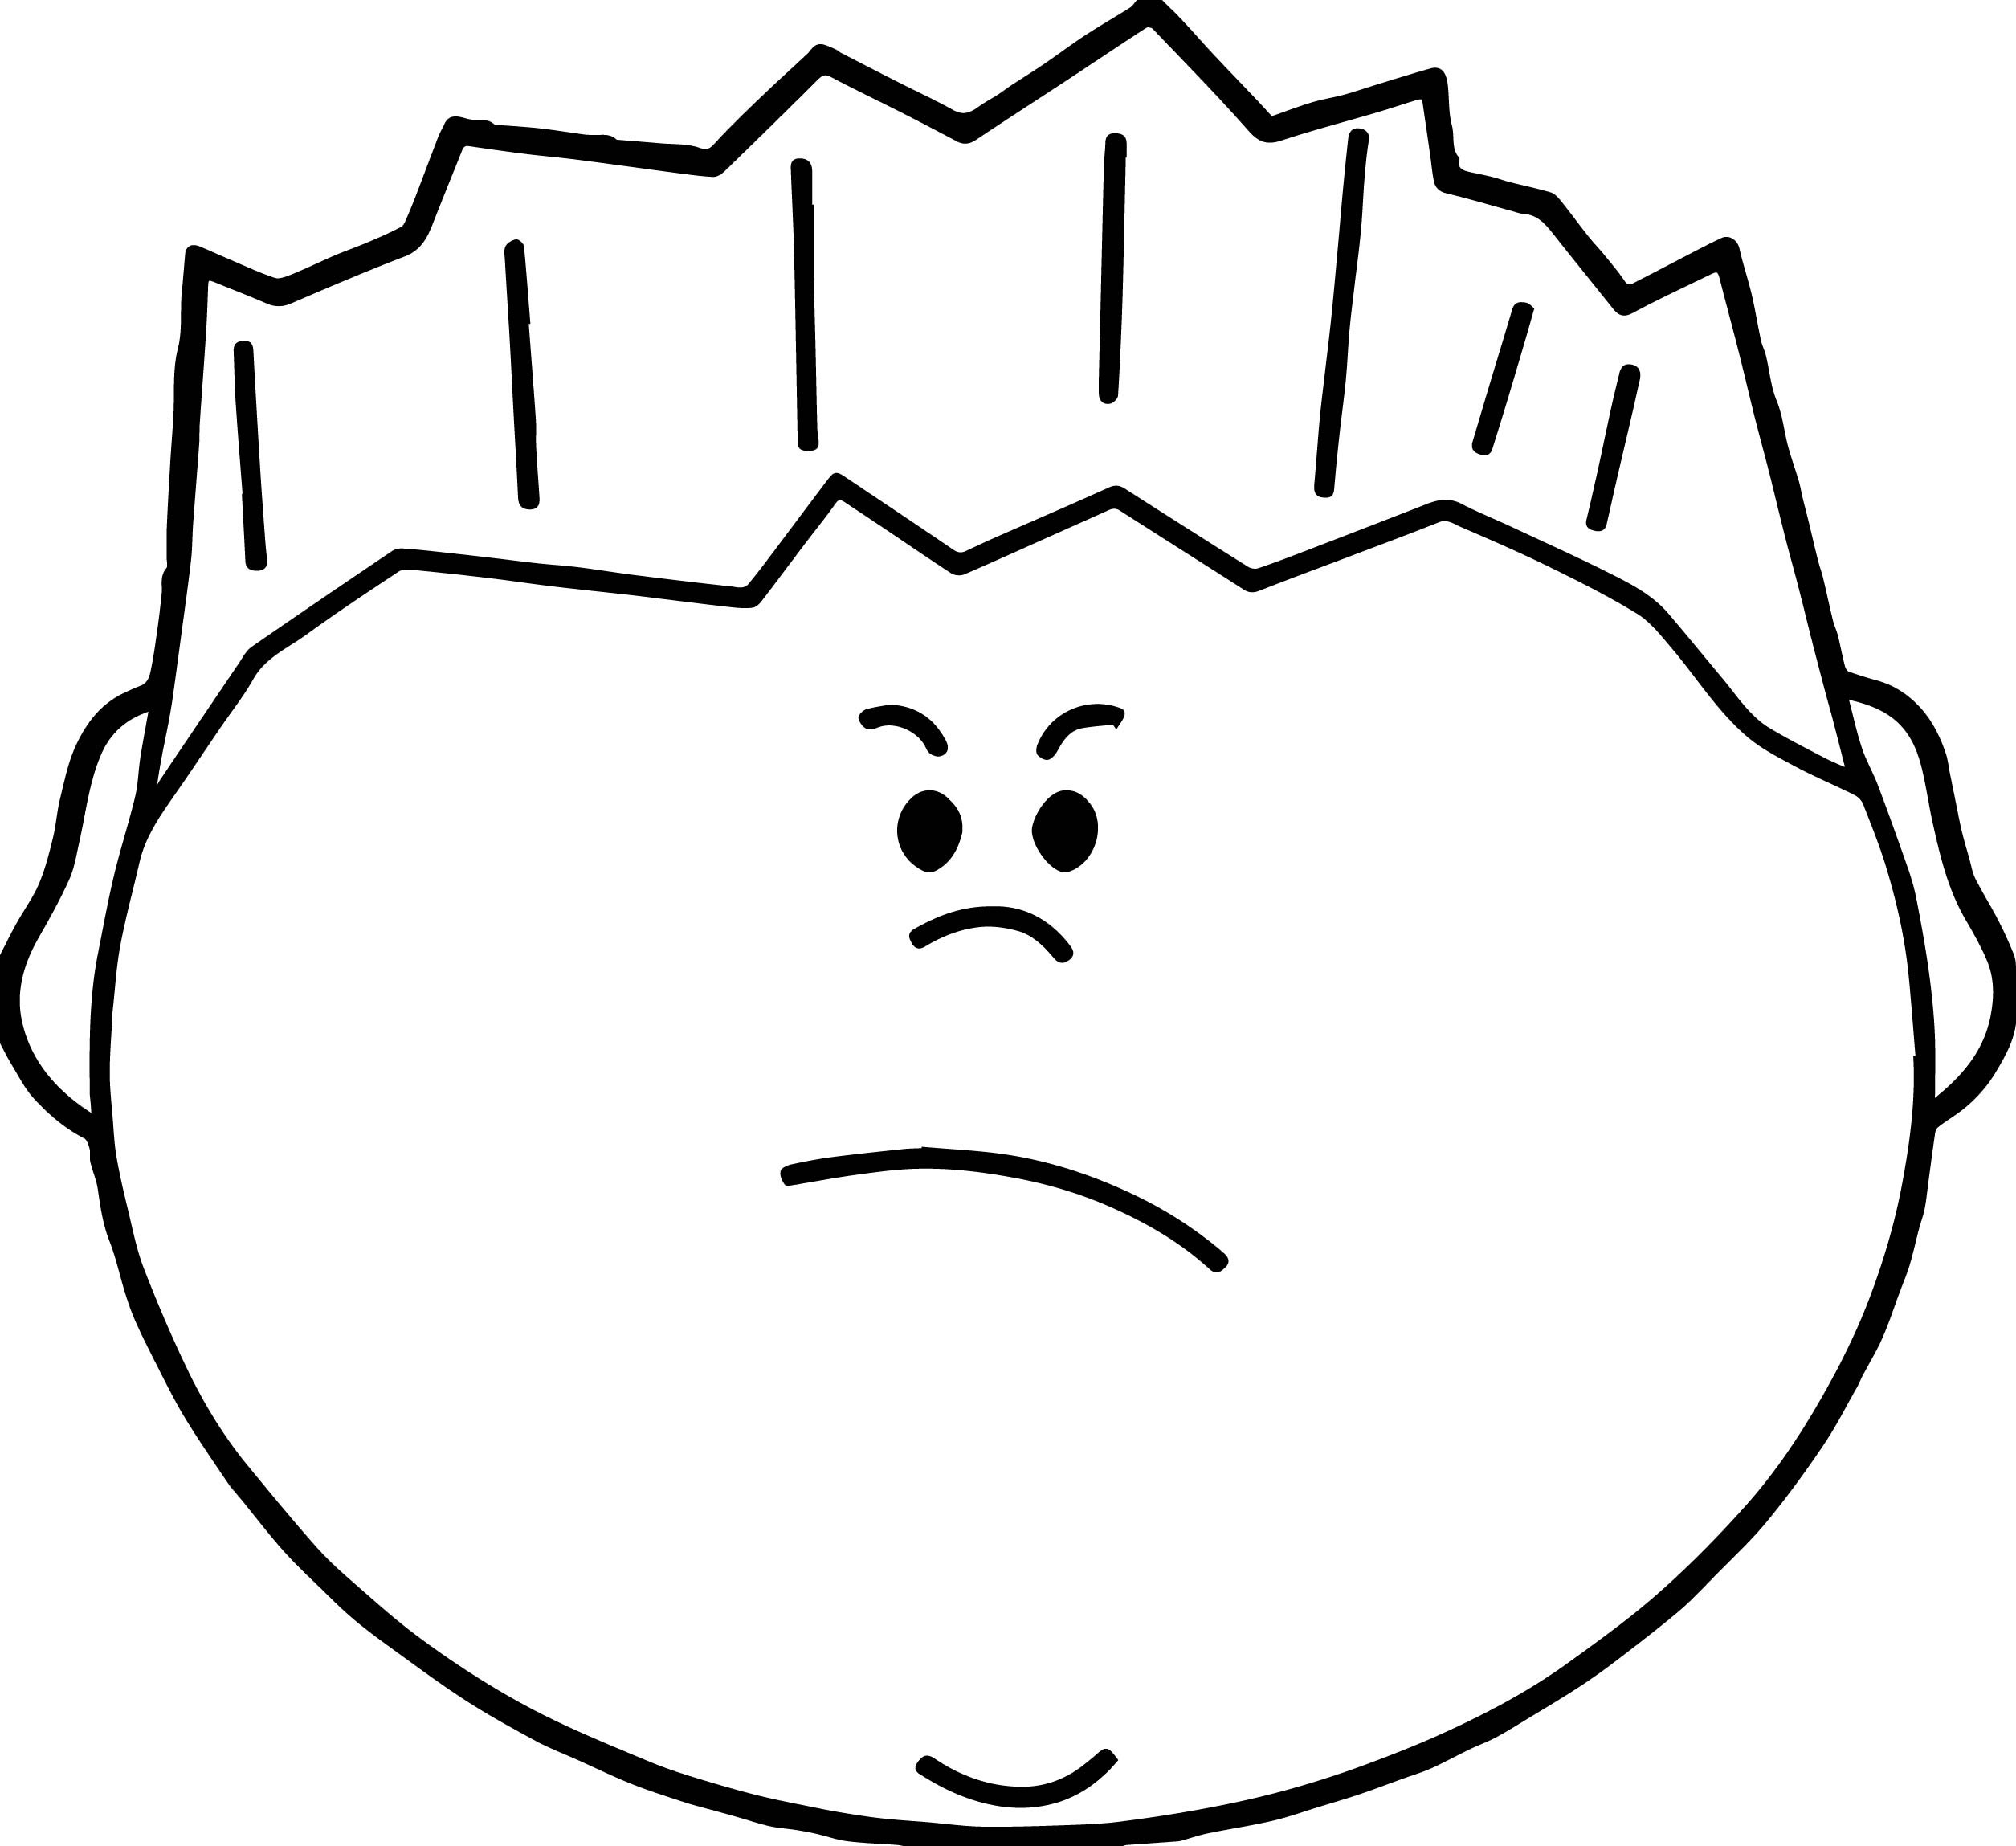 Coloring Pages Of Faces Of Boys
 Angry Boy Face Coloring Page